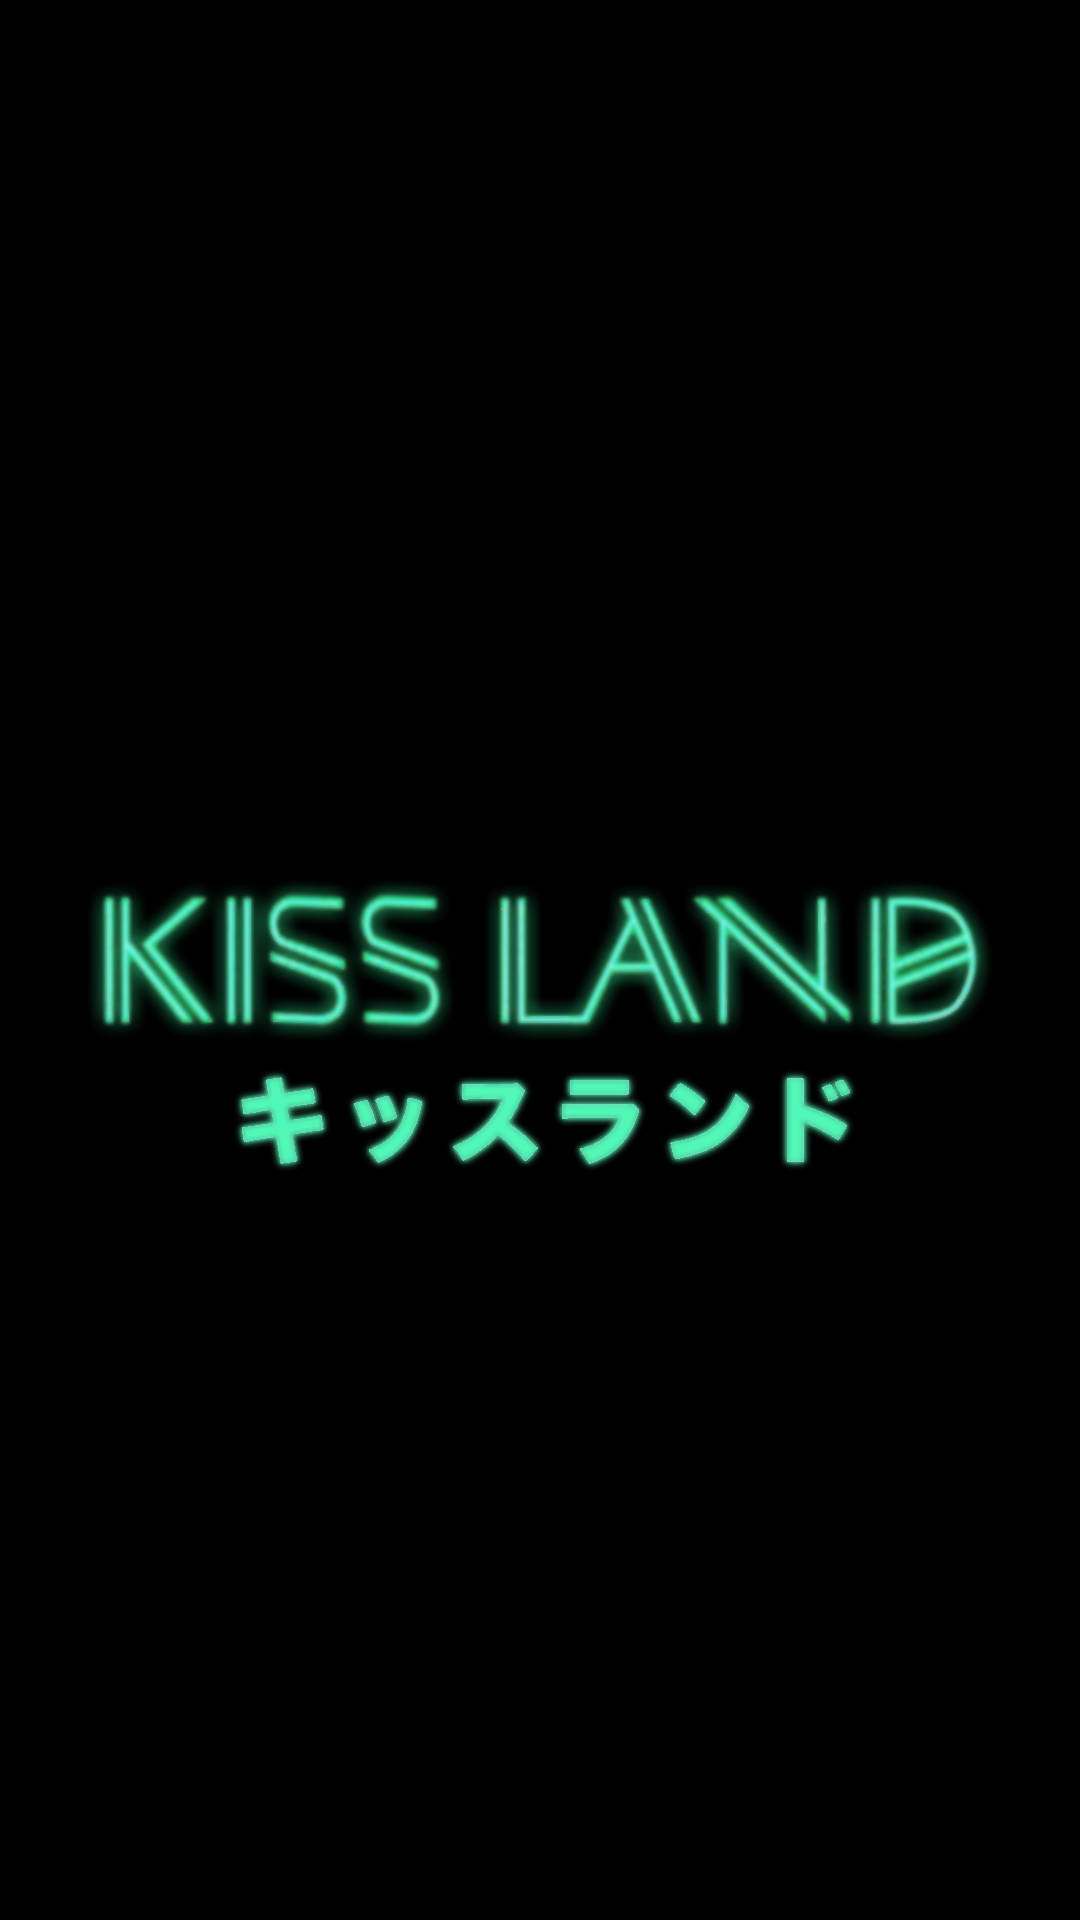 Kiss Land By The Weeknd Wallpaper